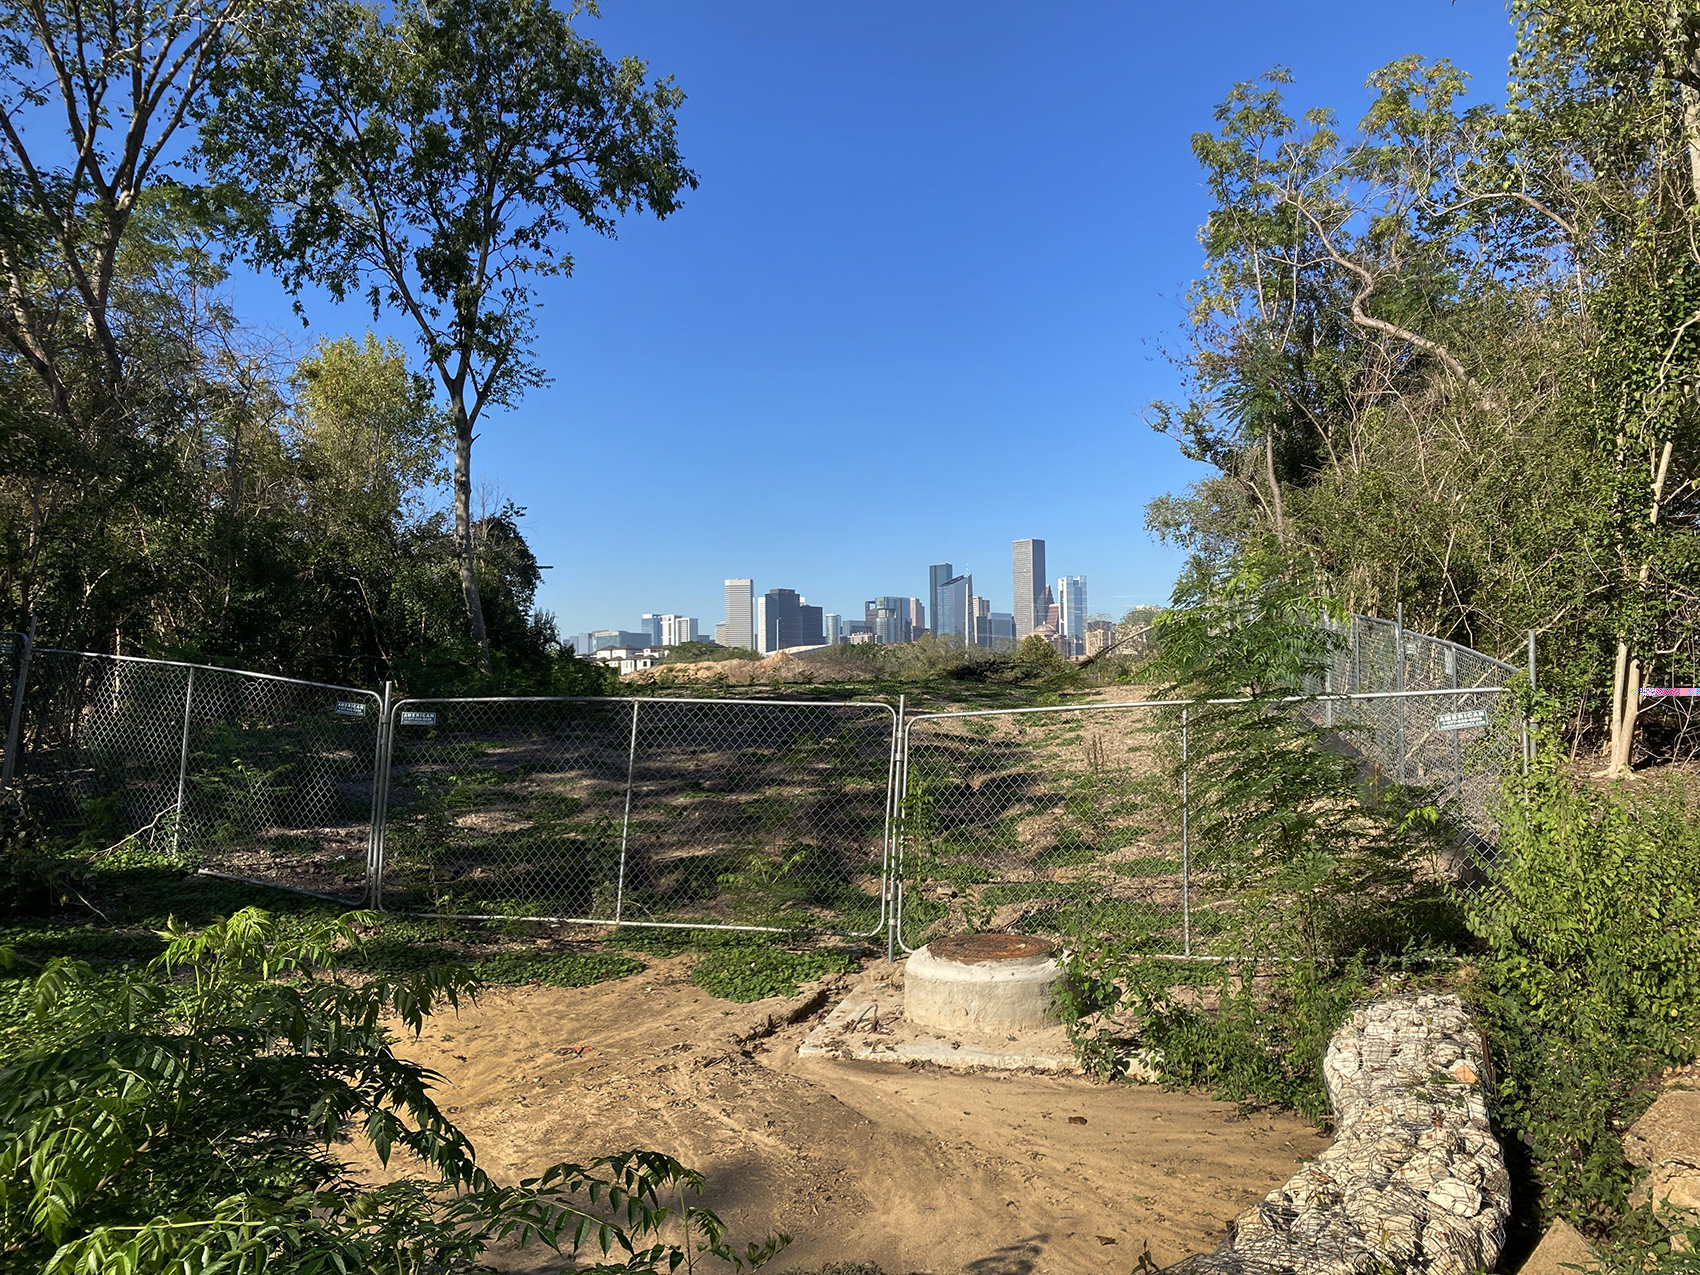 A view of downtown Houston through a fence near the site of the former Velasco Street incinerator site in Second Ward